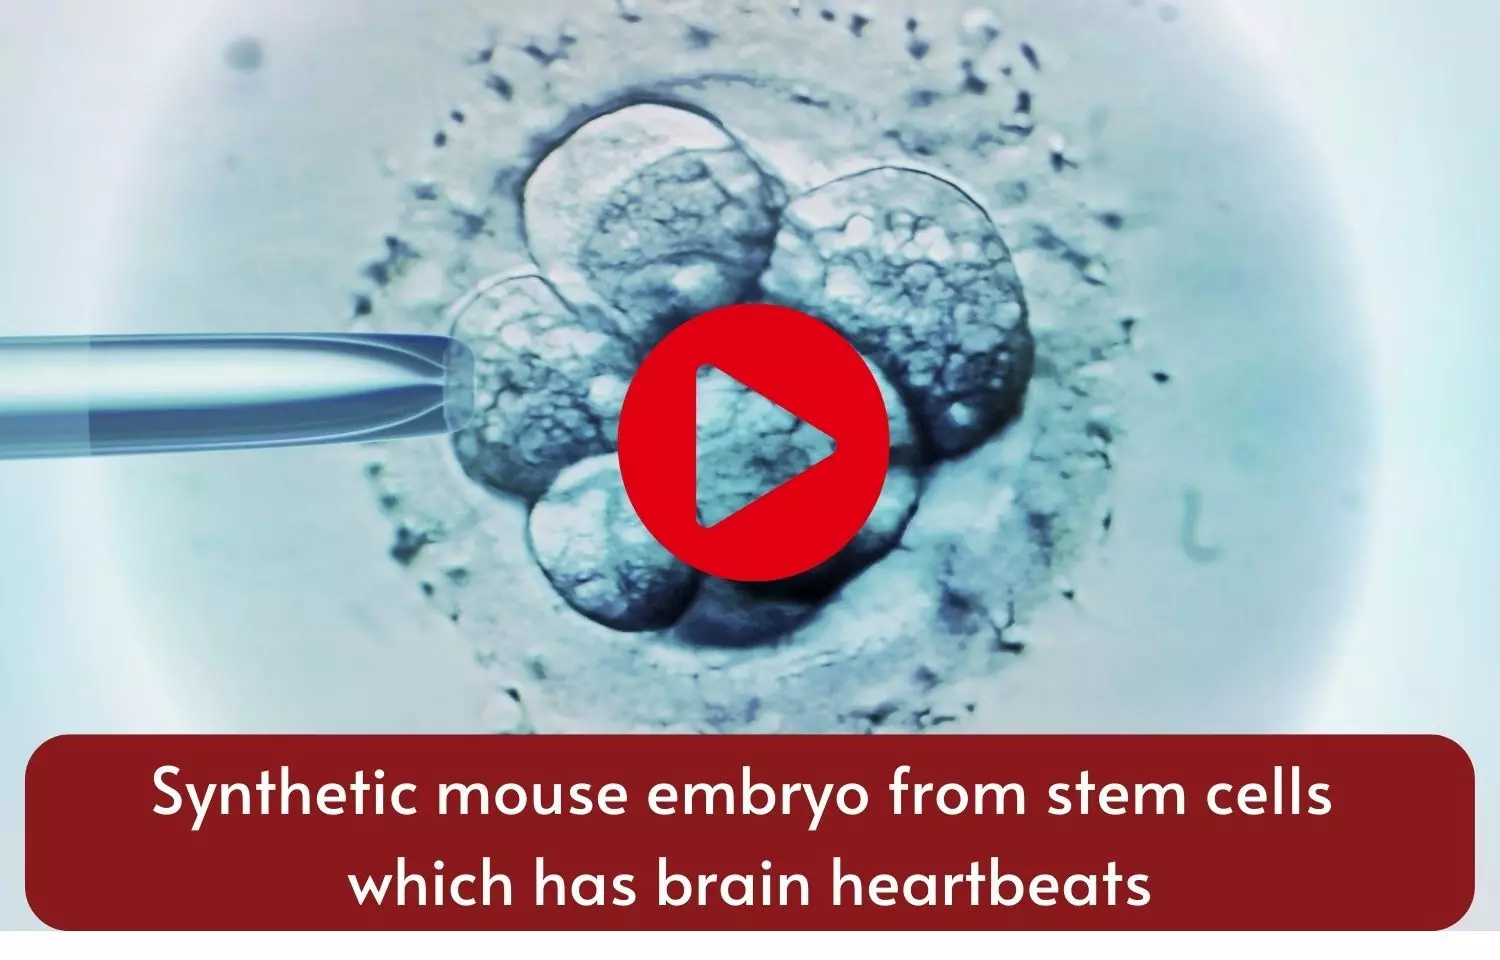 Synthetic mouse embryo from stem cells which has brain heartbeats